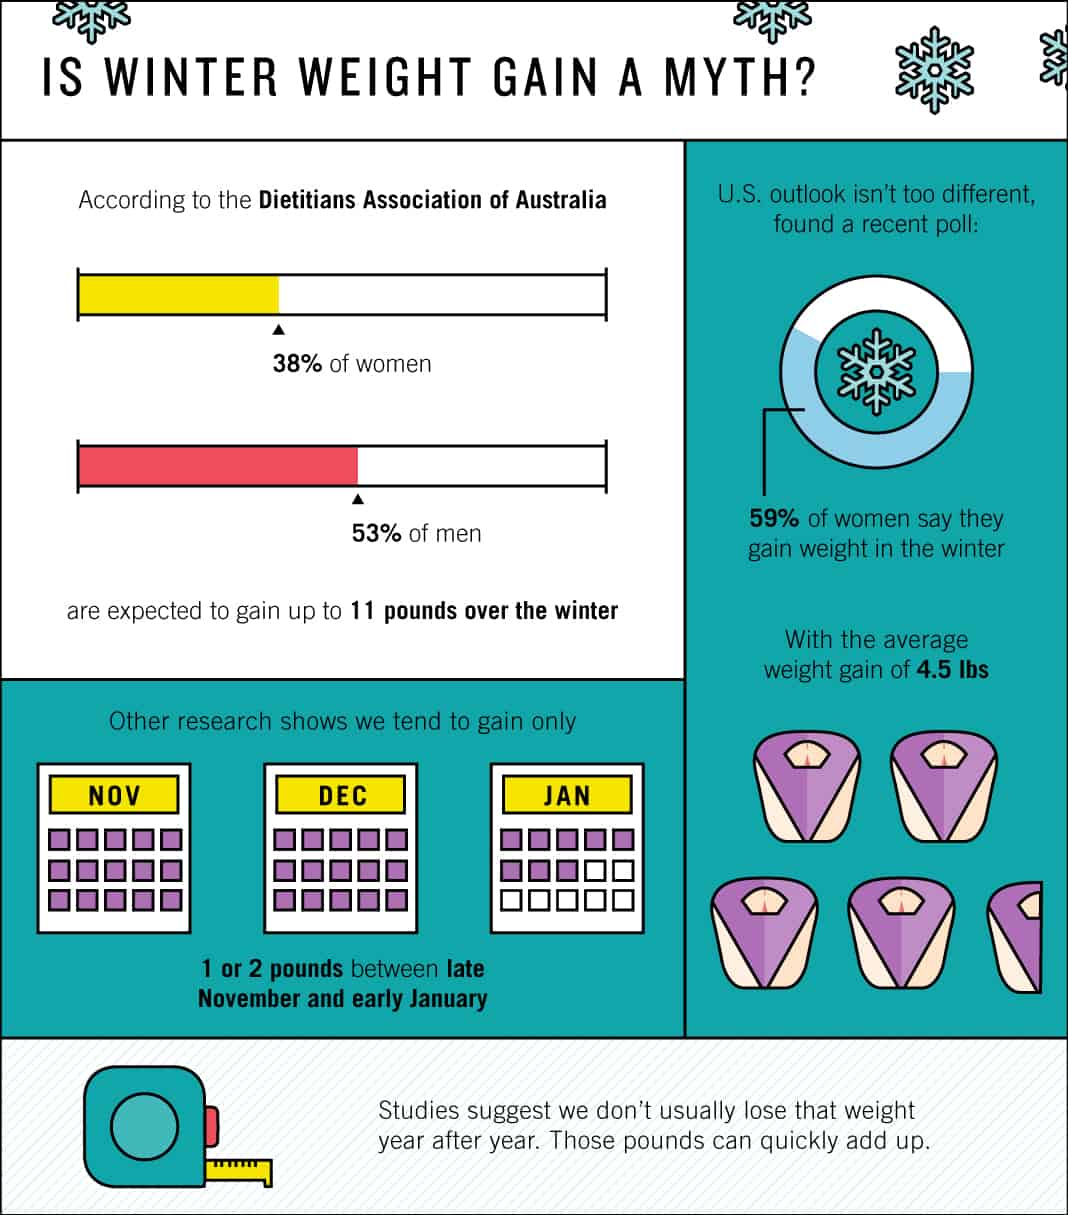 IS WINTER WEIGHT GAIN A MYTH?